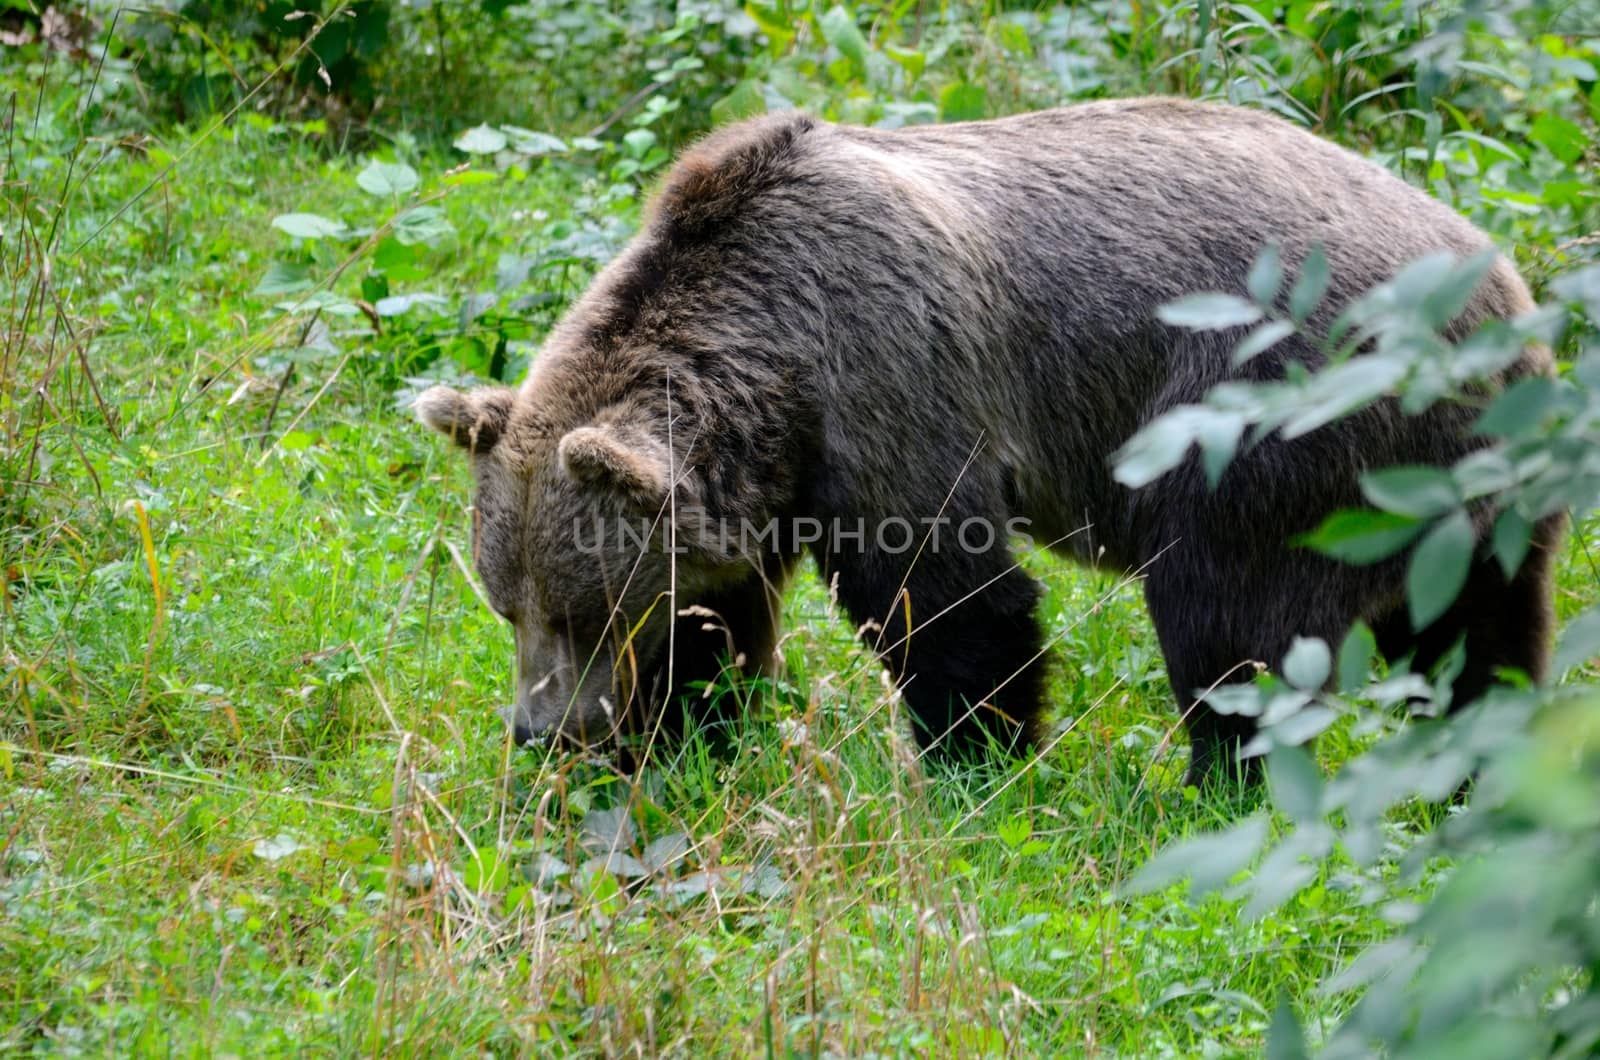 Single brown bear walking peacefully in Wroclaw's ZOO, Poland.